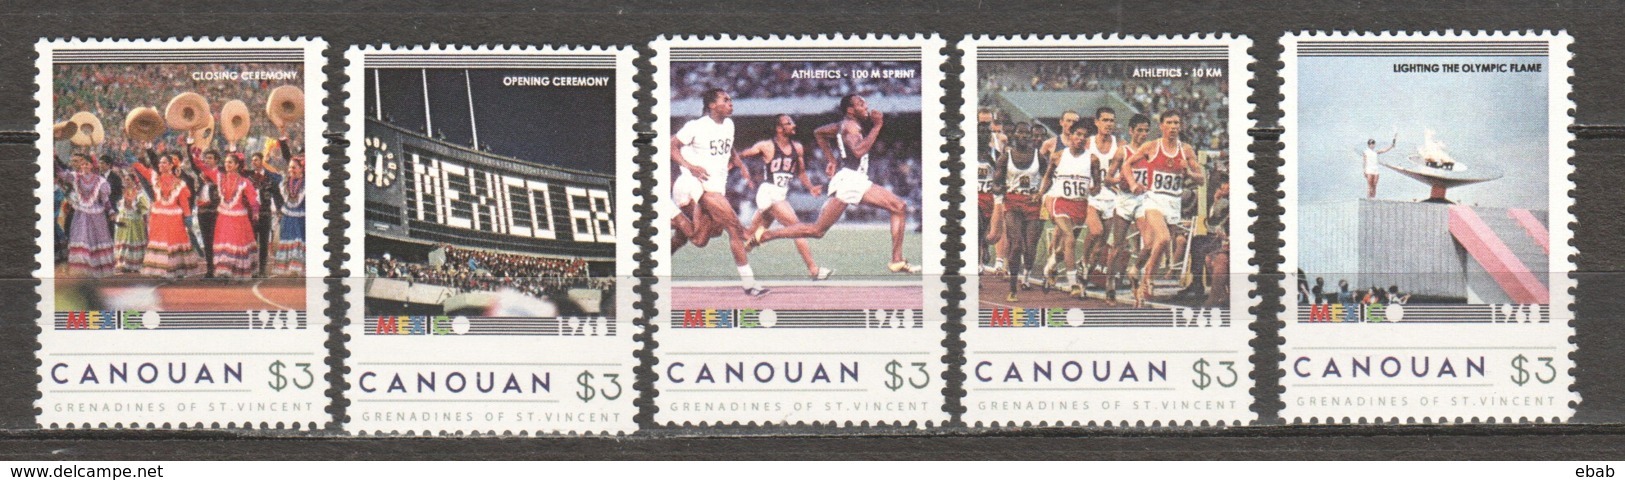 Grenadines St Vincent Canouan - MNH Set SUMMER OLYMPICS MEXICO 1968 - Summer 1968: Mexico City